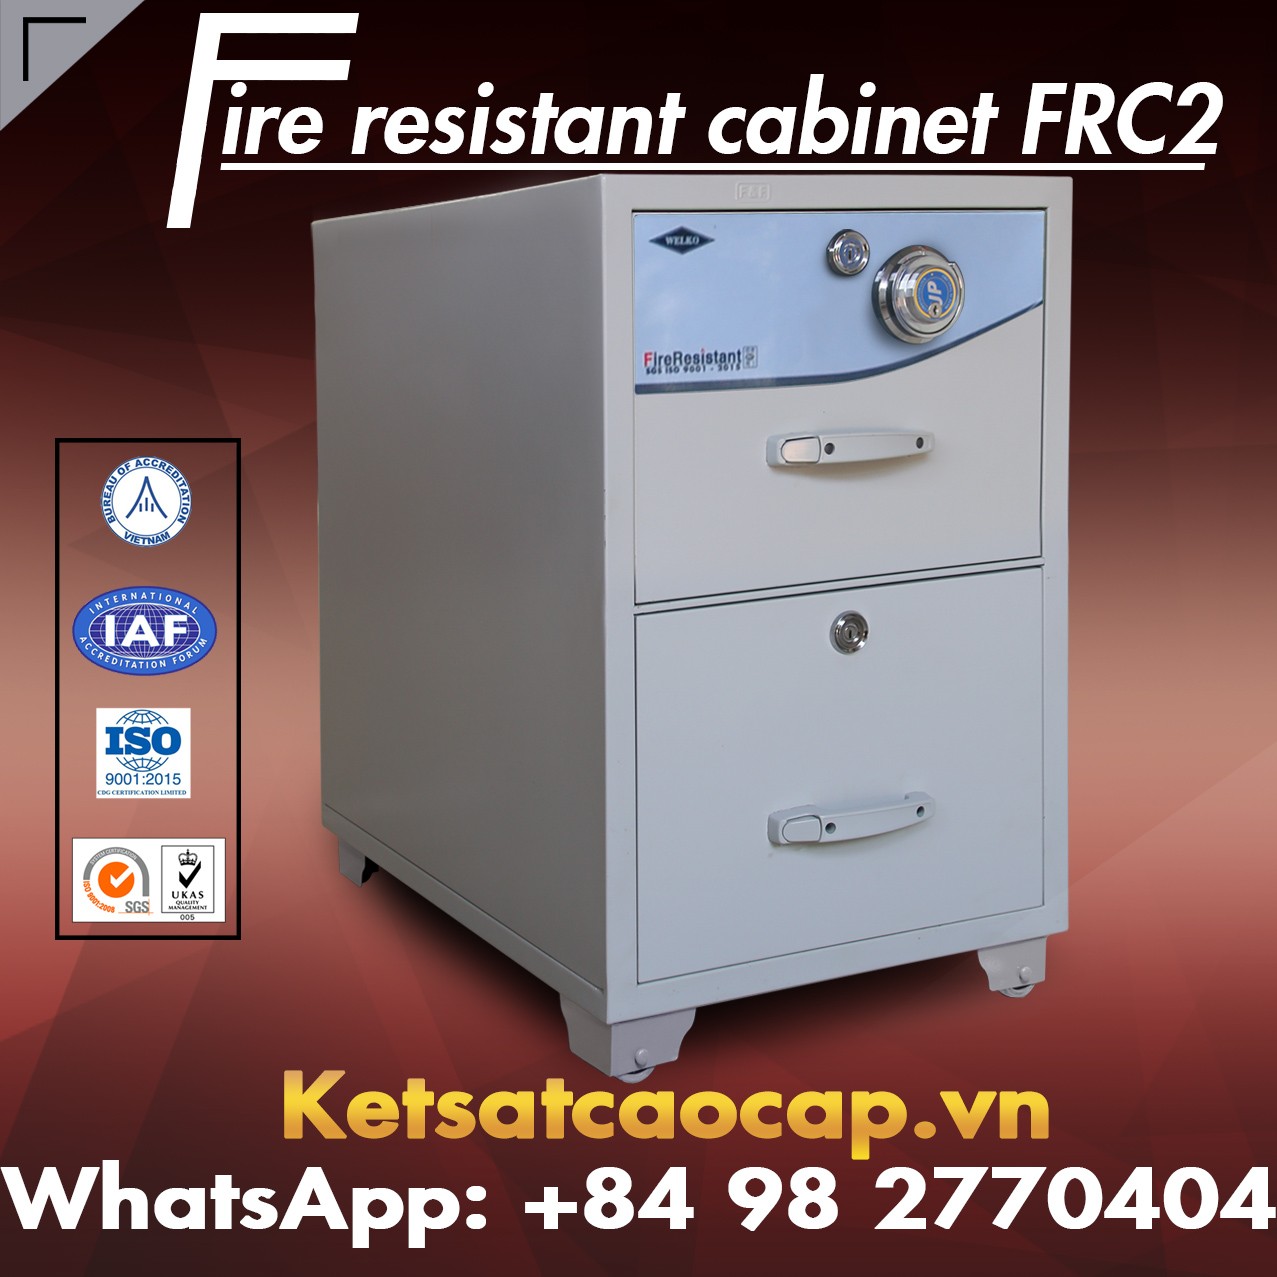 Fire Resistant Secure Storage Cabinets